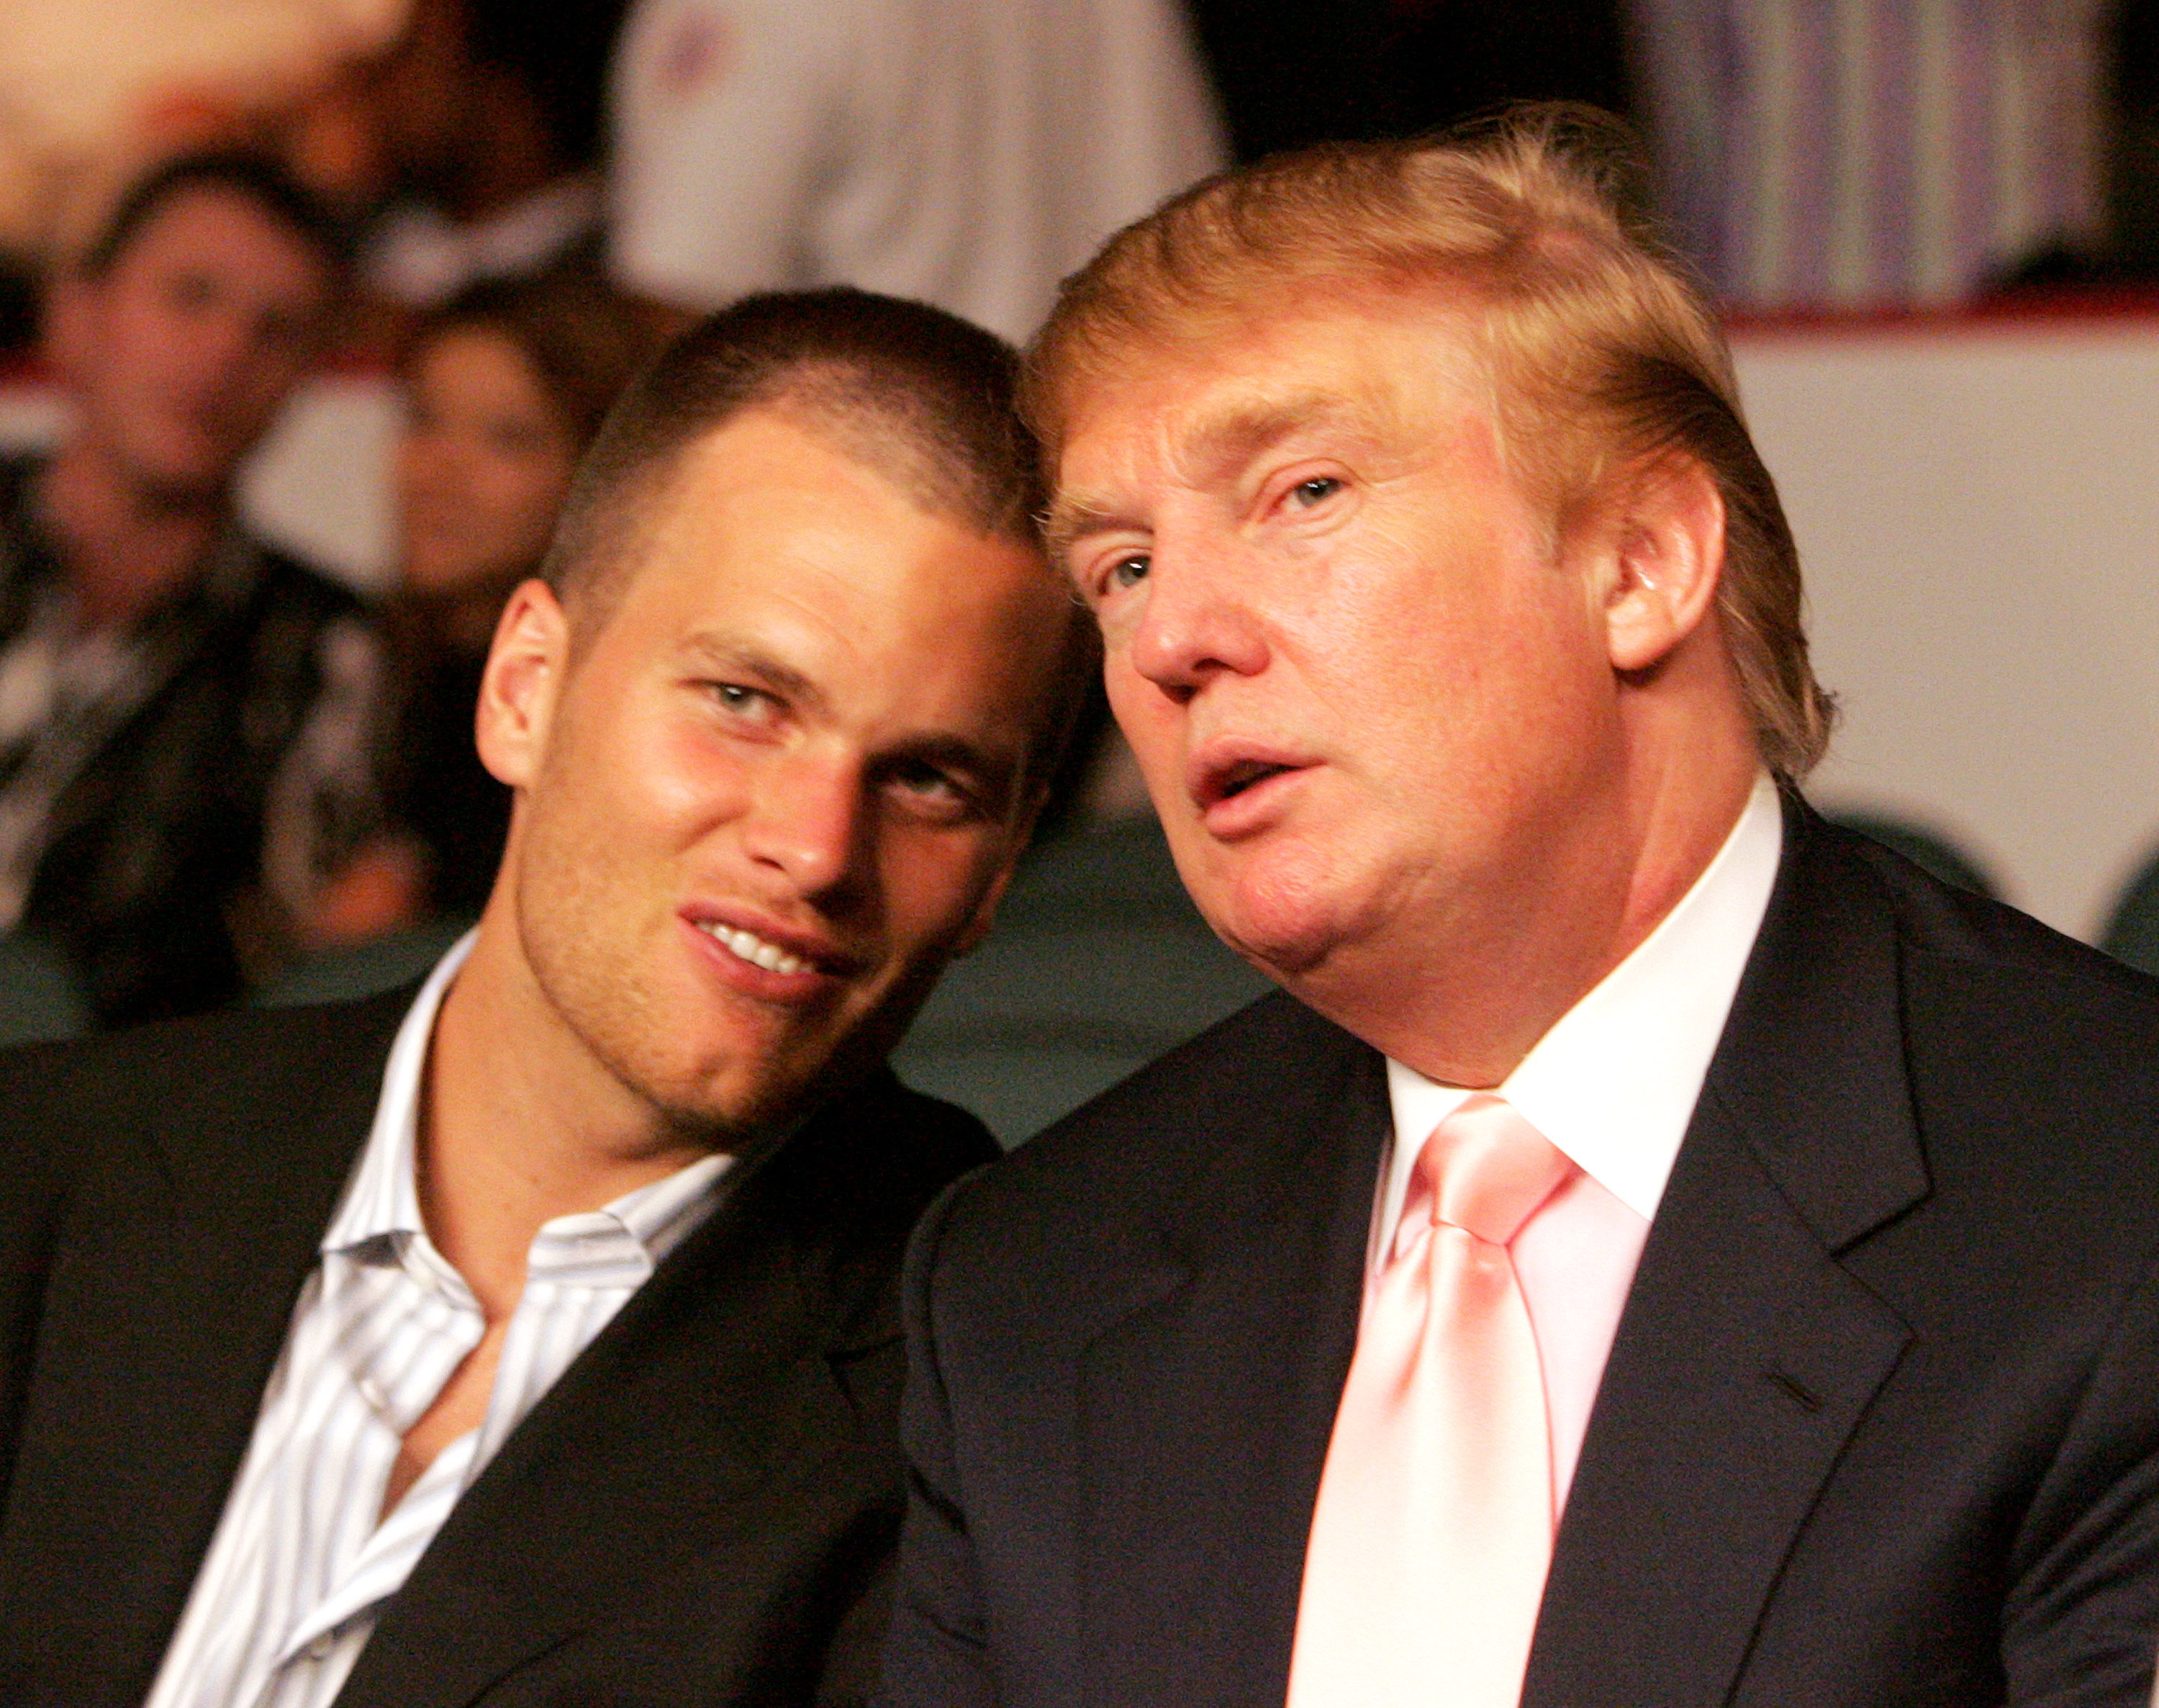 Tom Brady Has Slowly Moved Away From Politics His Whole Career